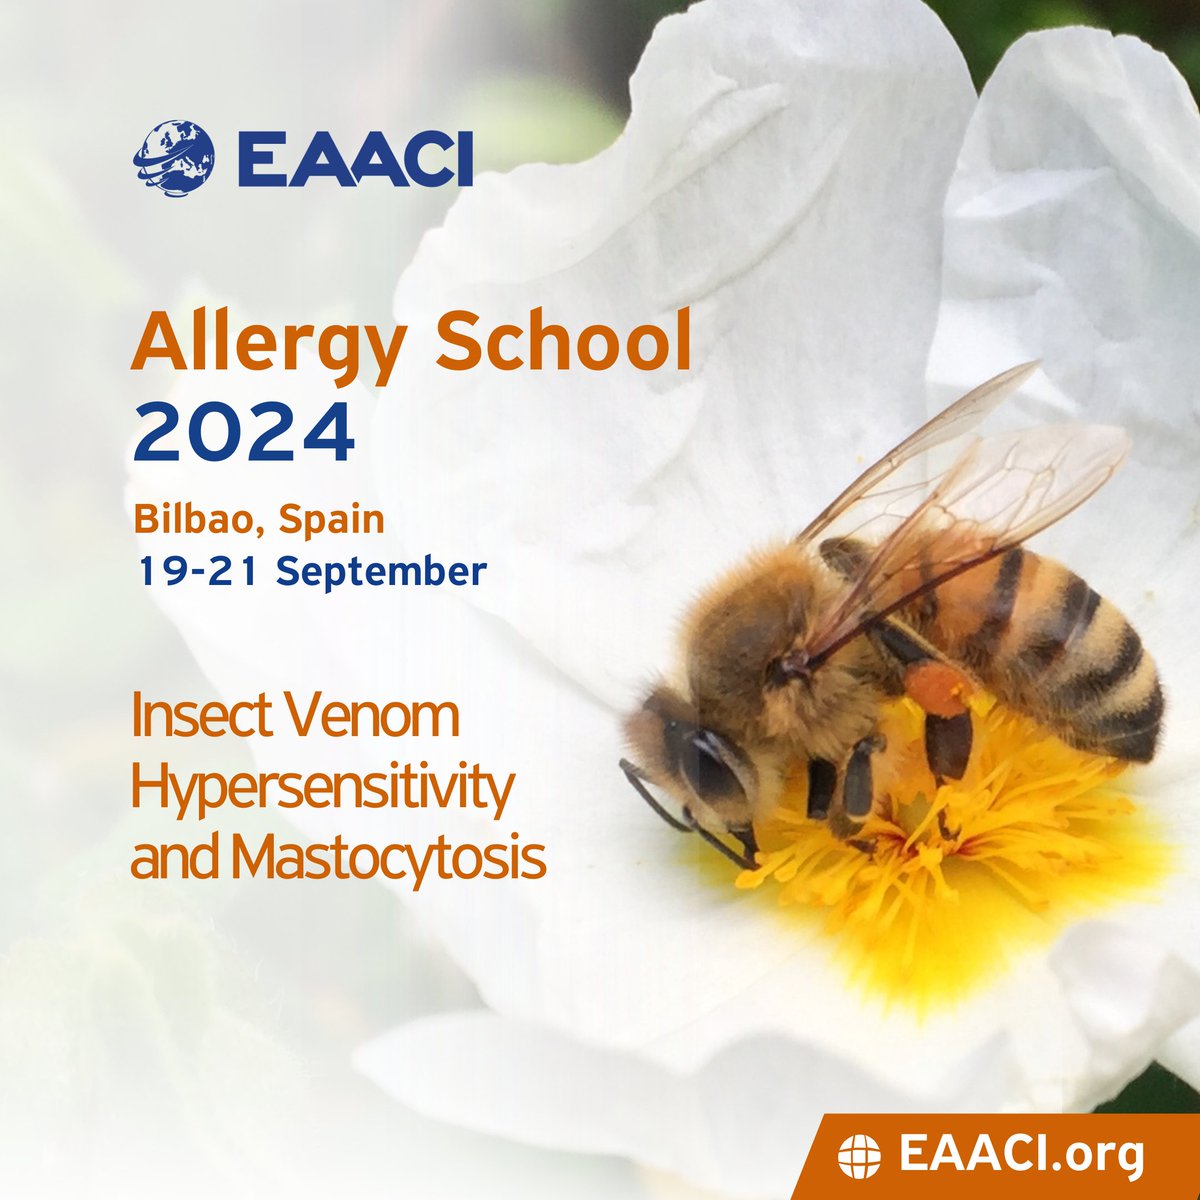 Join us at the EAACI Allergy School on Insect Venom Hypersensitivity and Mastocytosis in Bilbao, Spain, 19-21 September 2024. Abstract submission deadline approaching by 10th June at 23:59 CET. ow.ly/j6K950RA3l8 #AllergySchool #EAACI #ResearchOpportunity